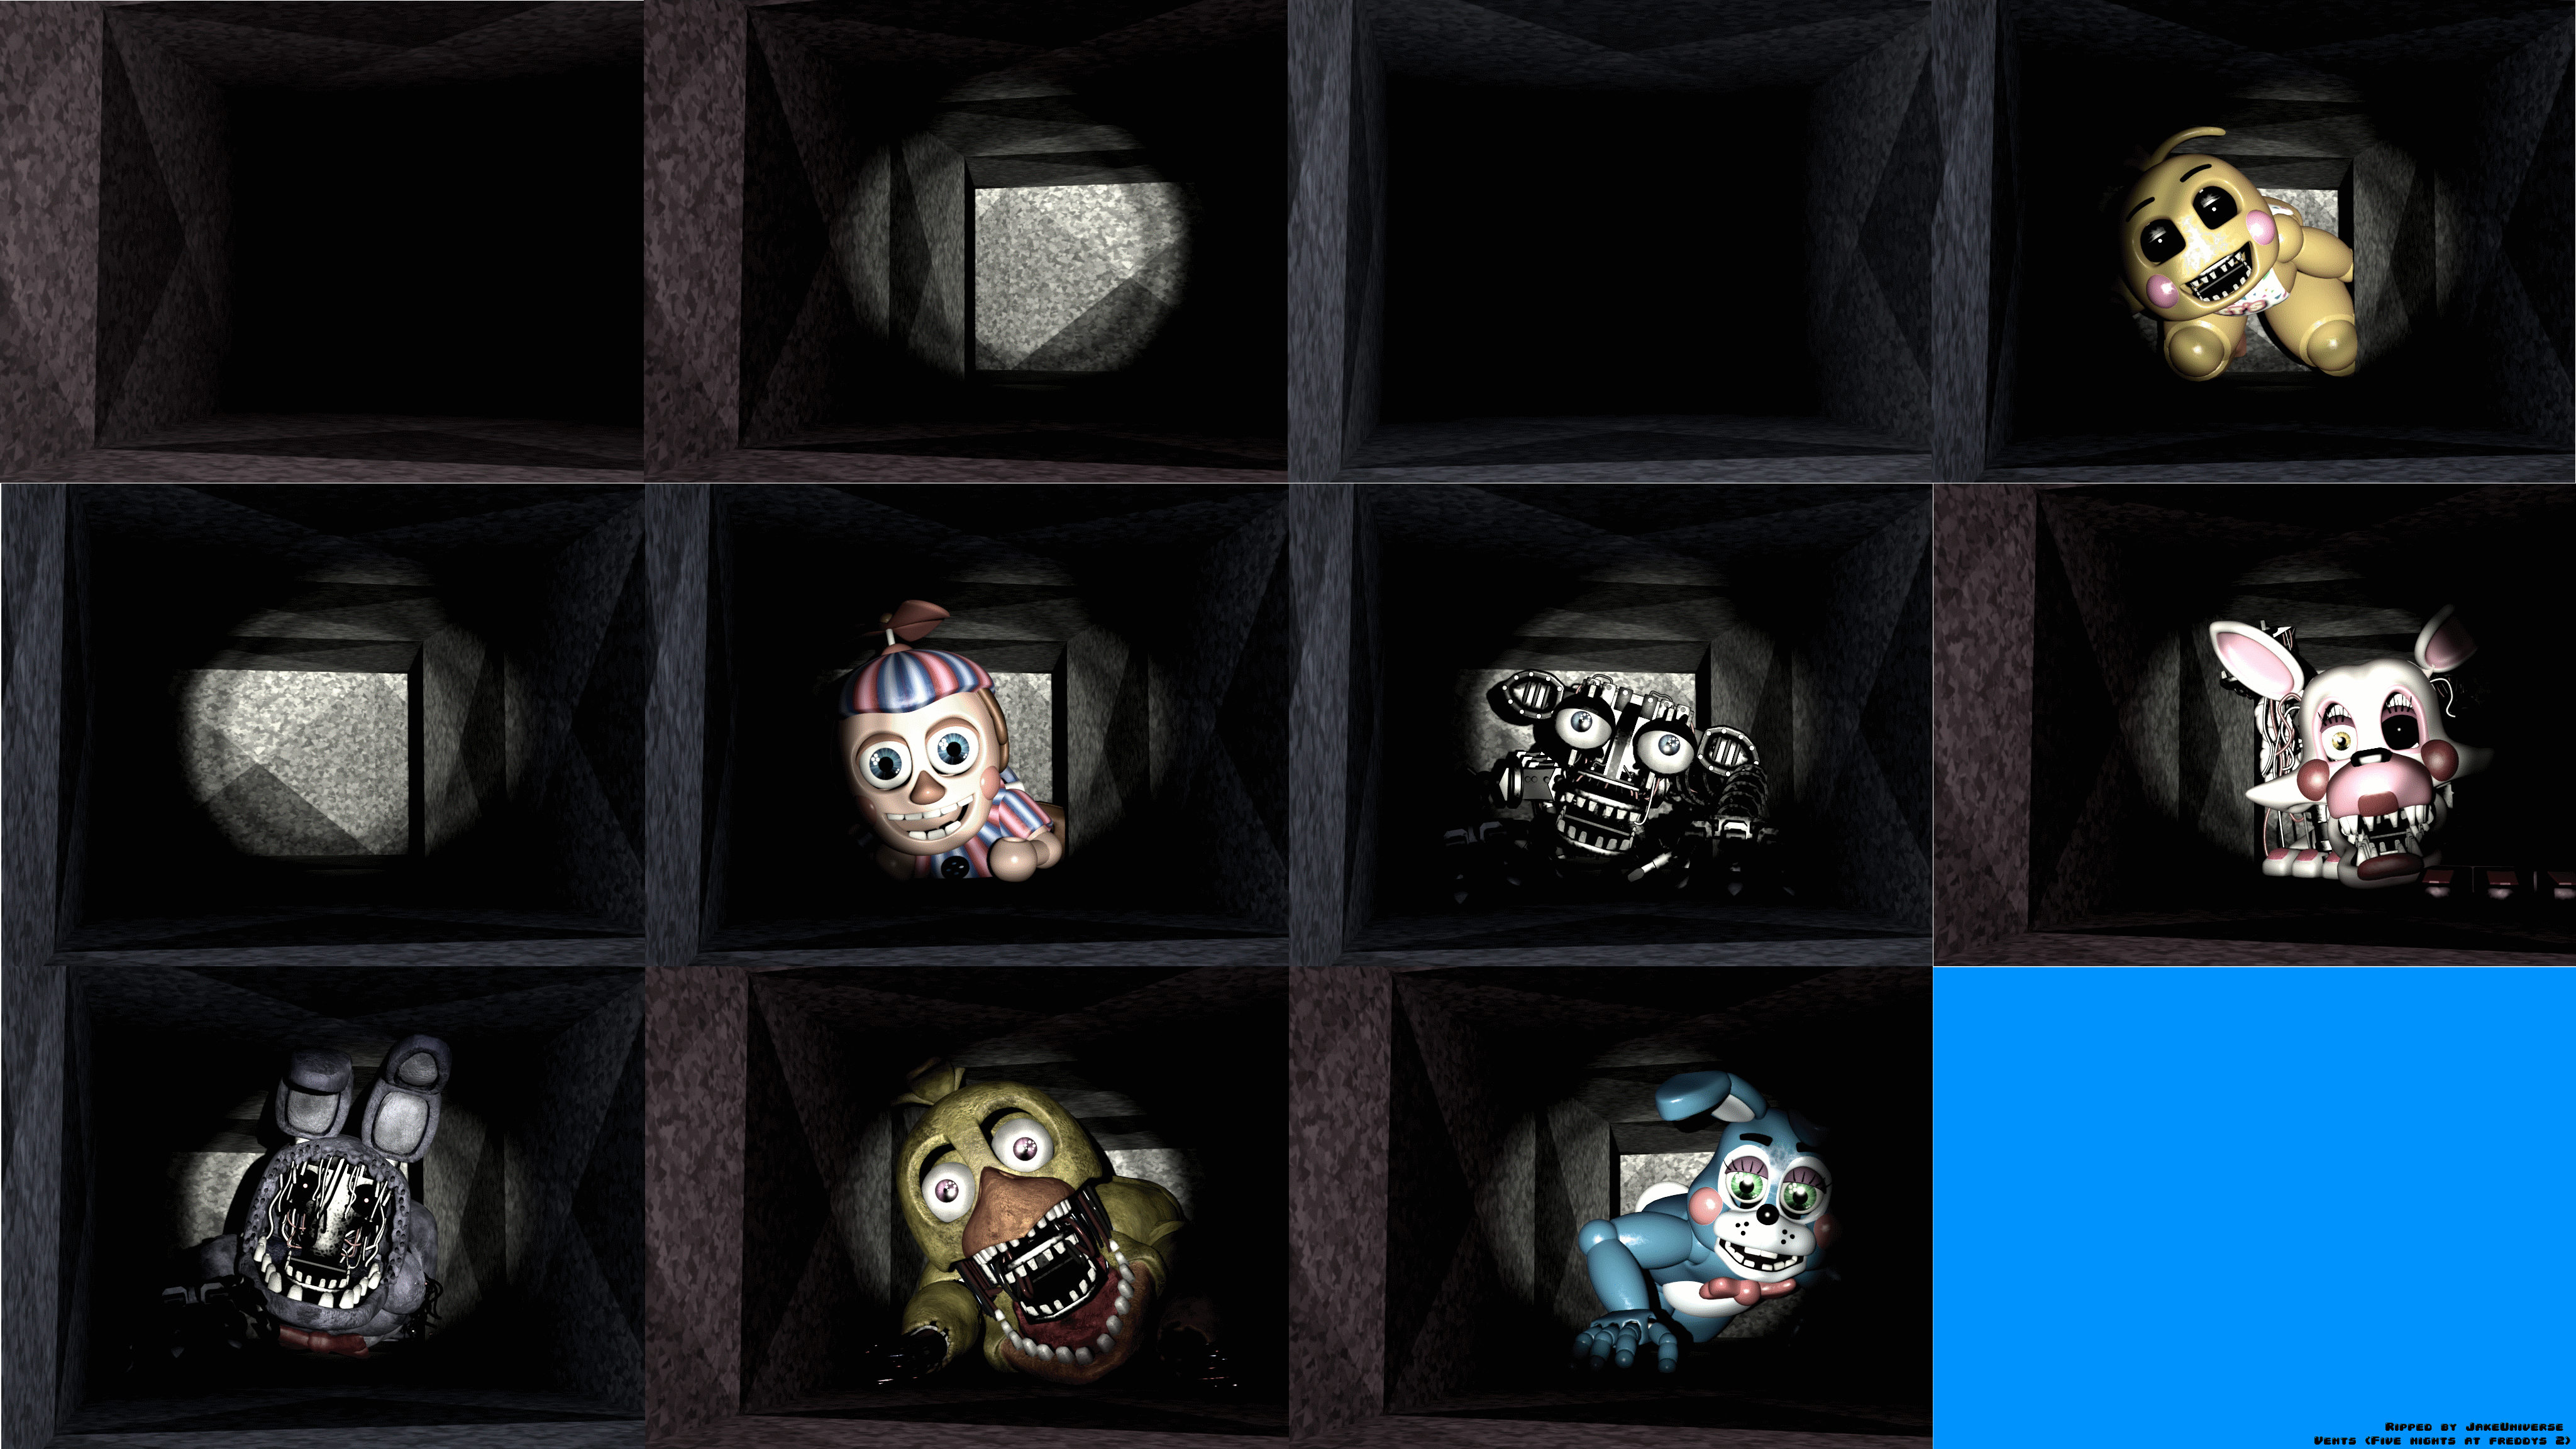 PC / Computer - Five Nights at Freddy's 2 - Vents - The Spriters Resource